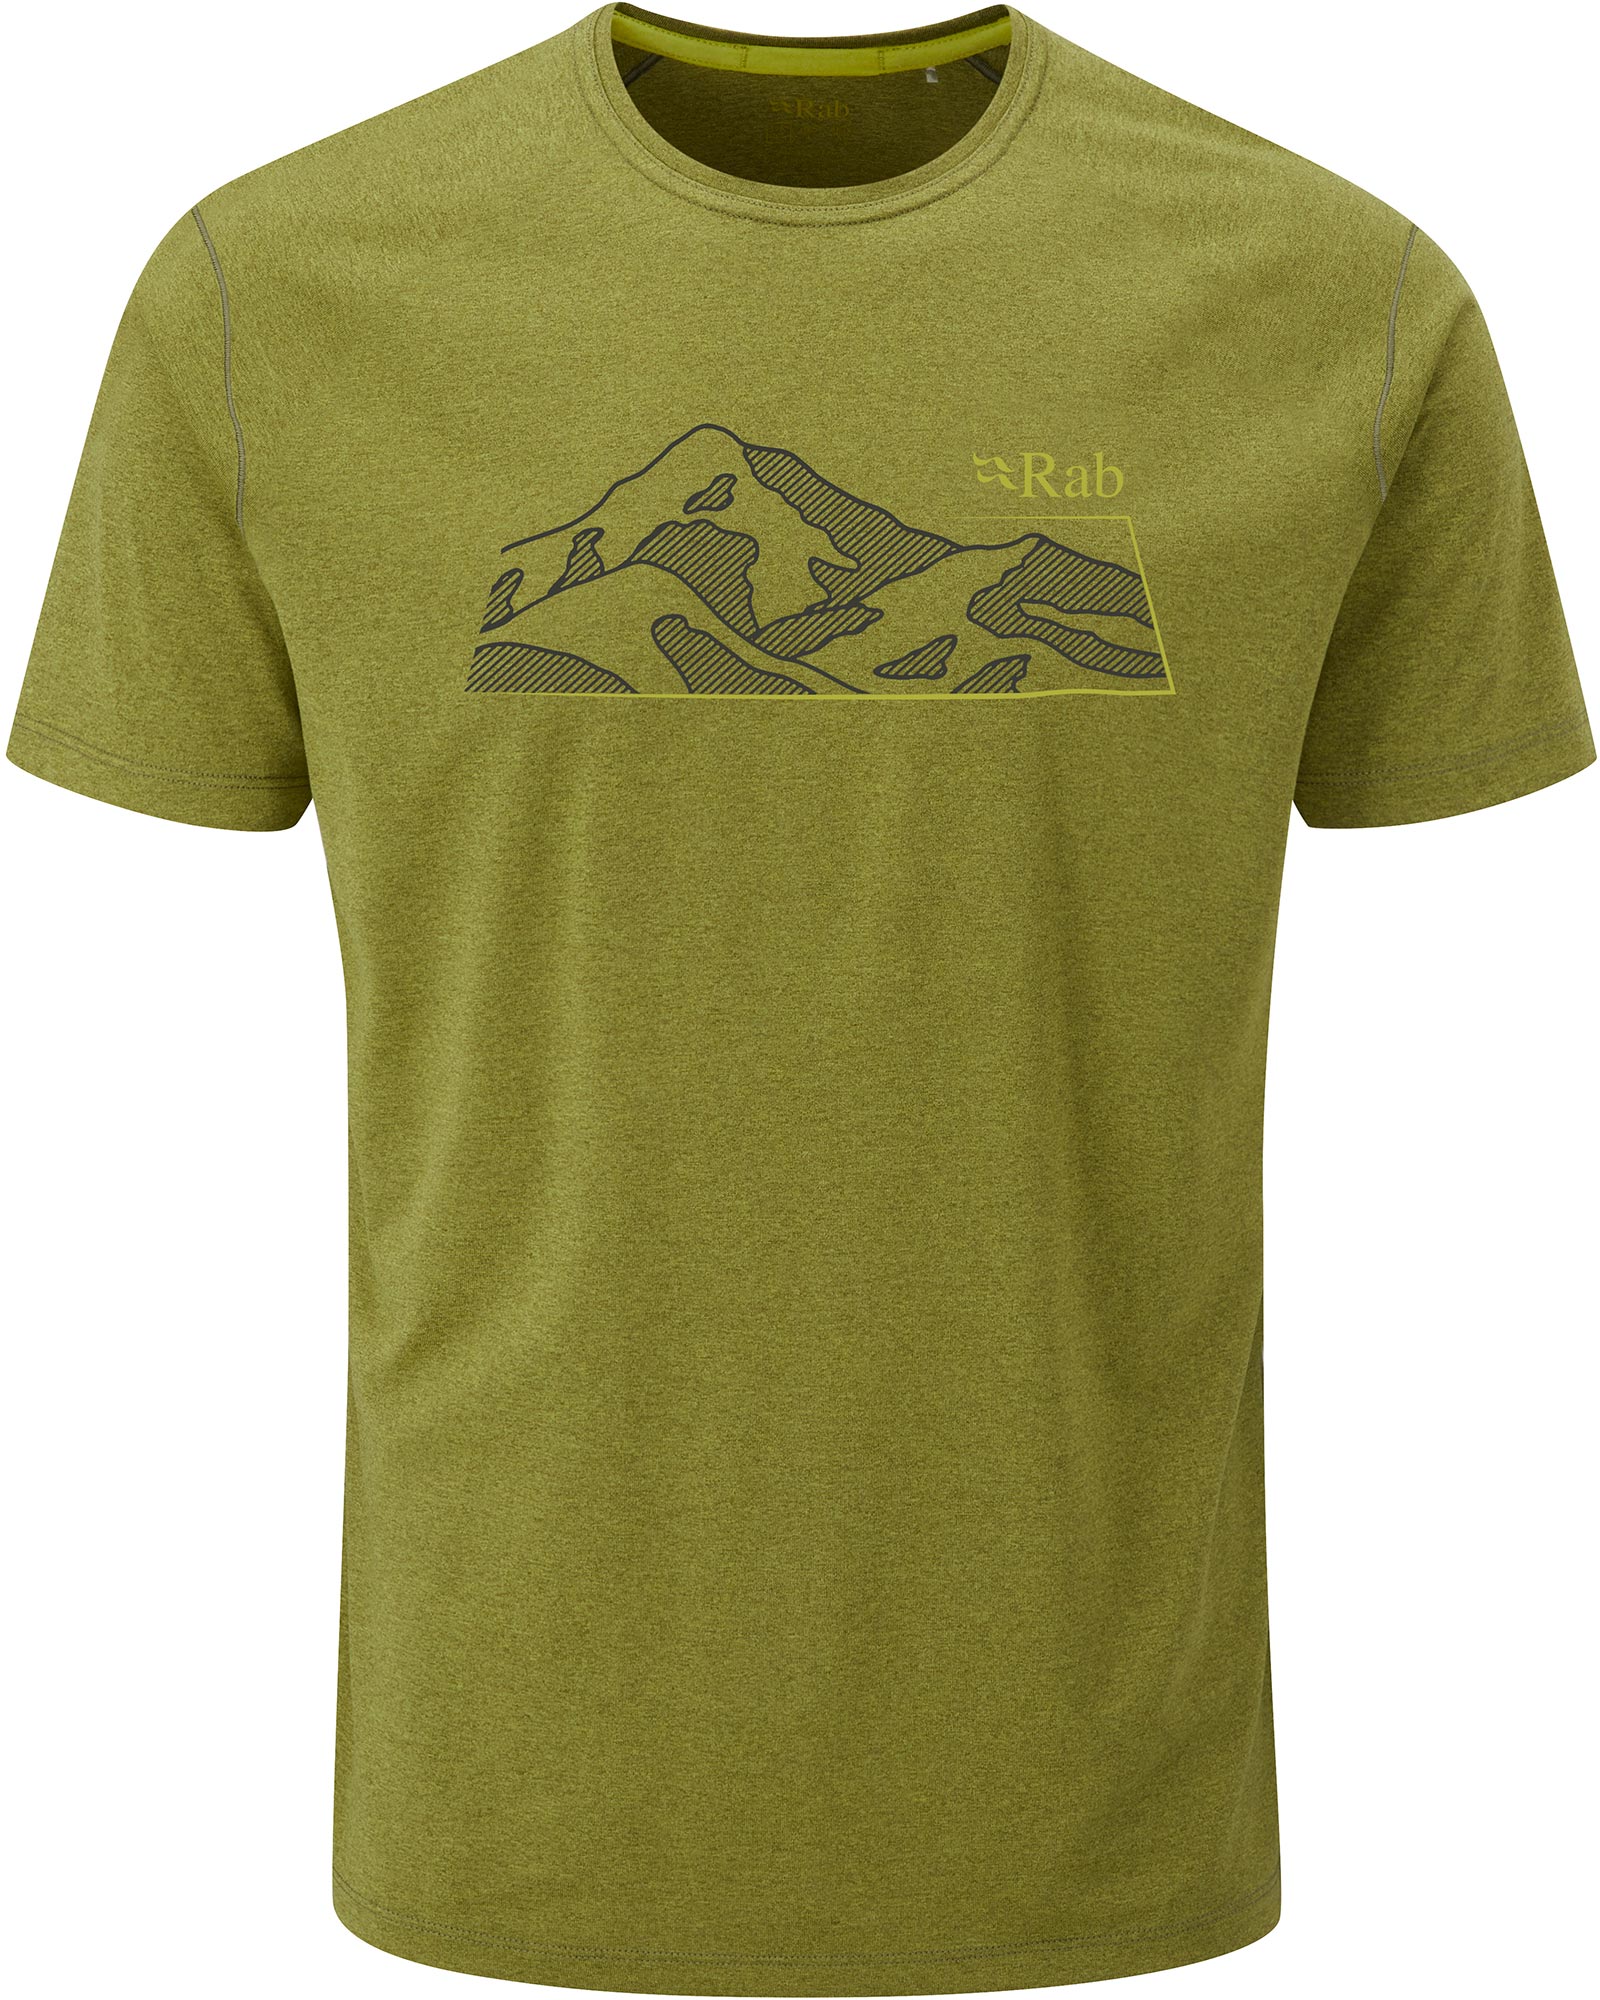 Product image of Rab Mantle Mountain Men's T-Shirt